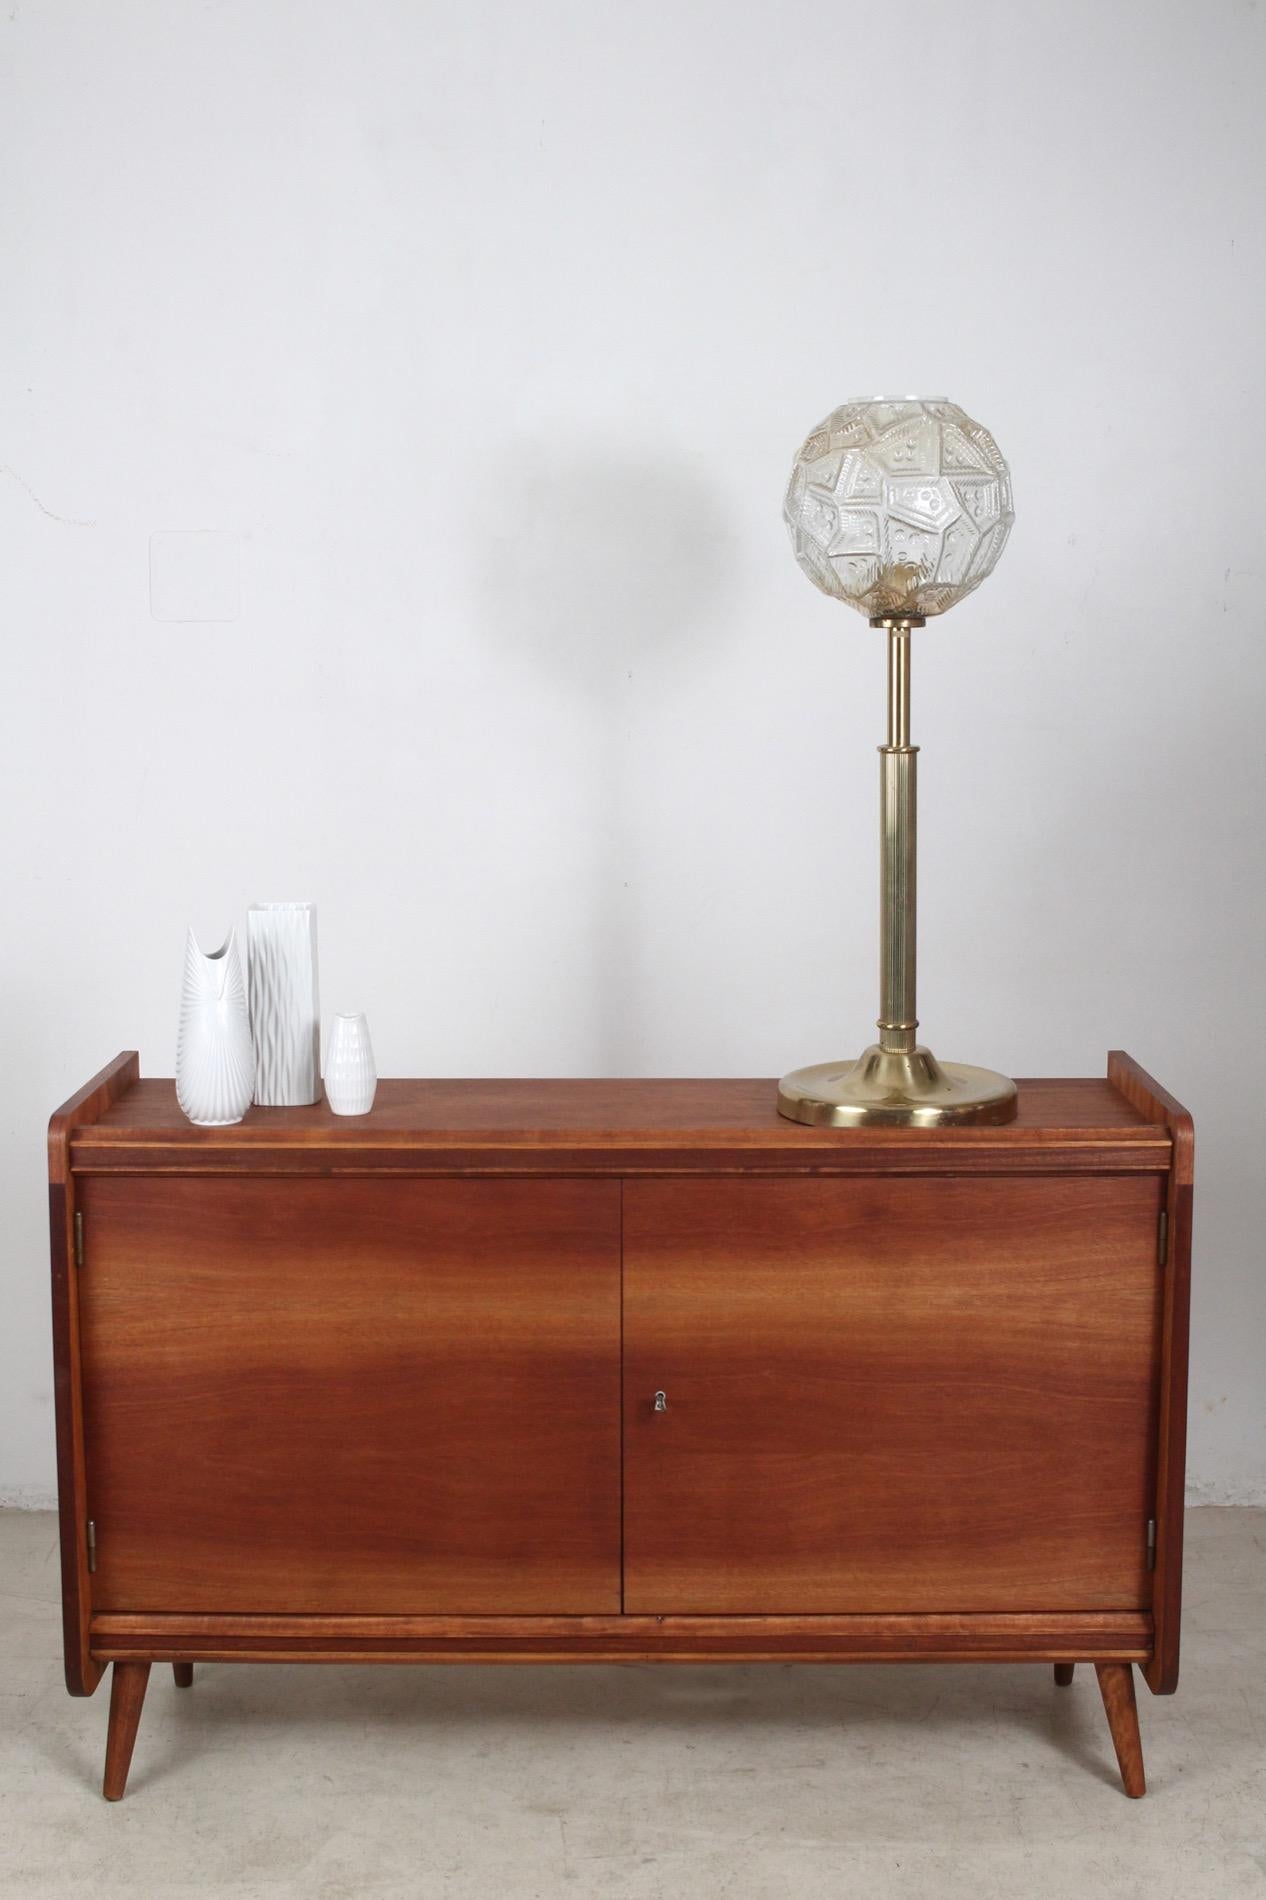 20th Century Adolf Loos Stlye Brass Floor Lamp with a Unique Glass Shade For Sale